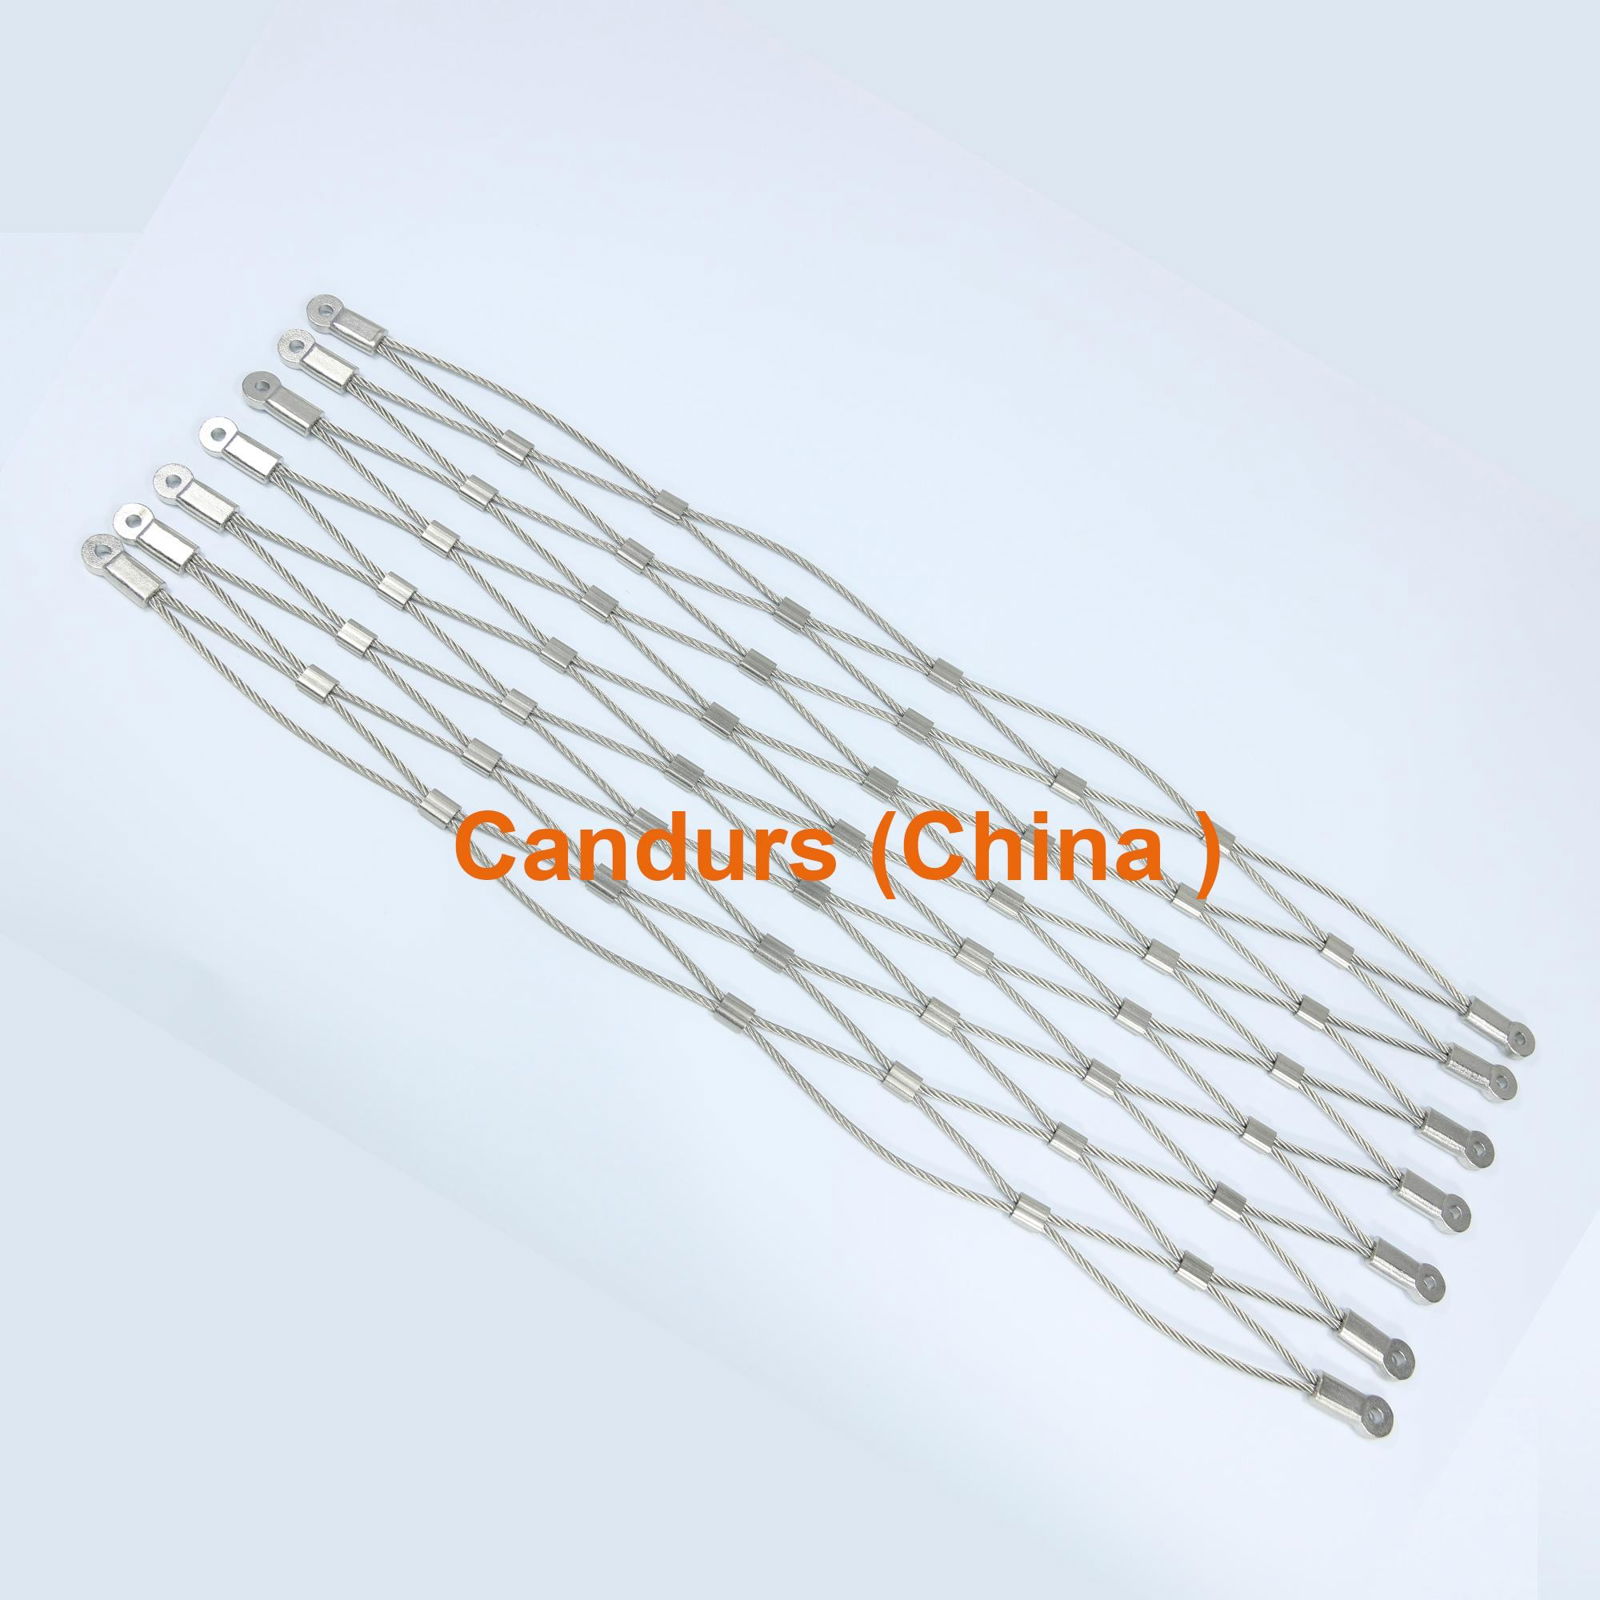 Flexible Stainless Steel Rope Fence On Bridges And Staircase 3